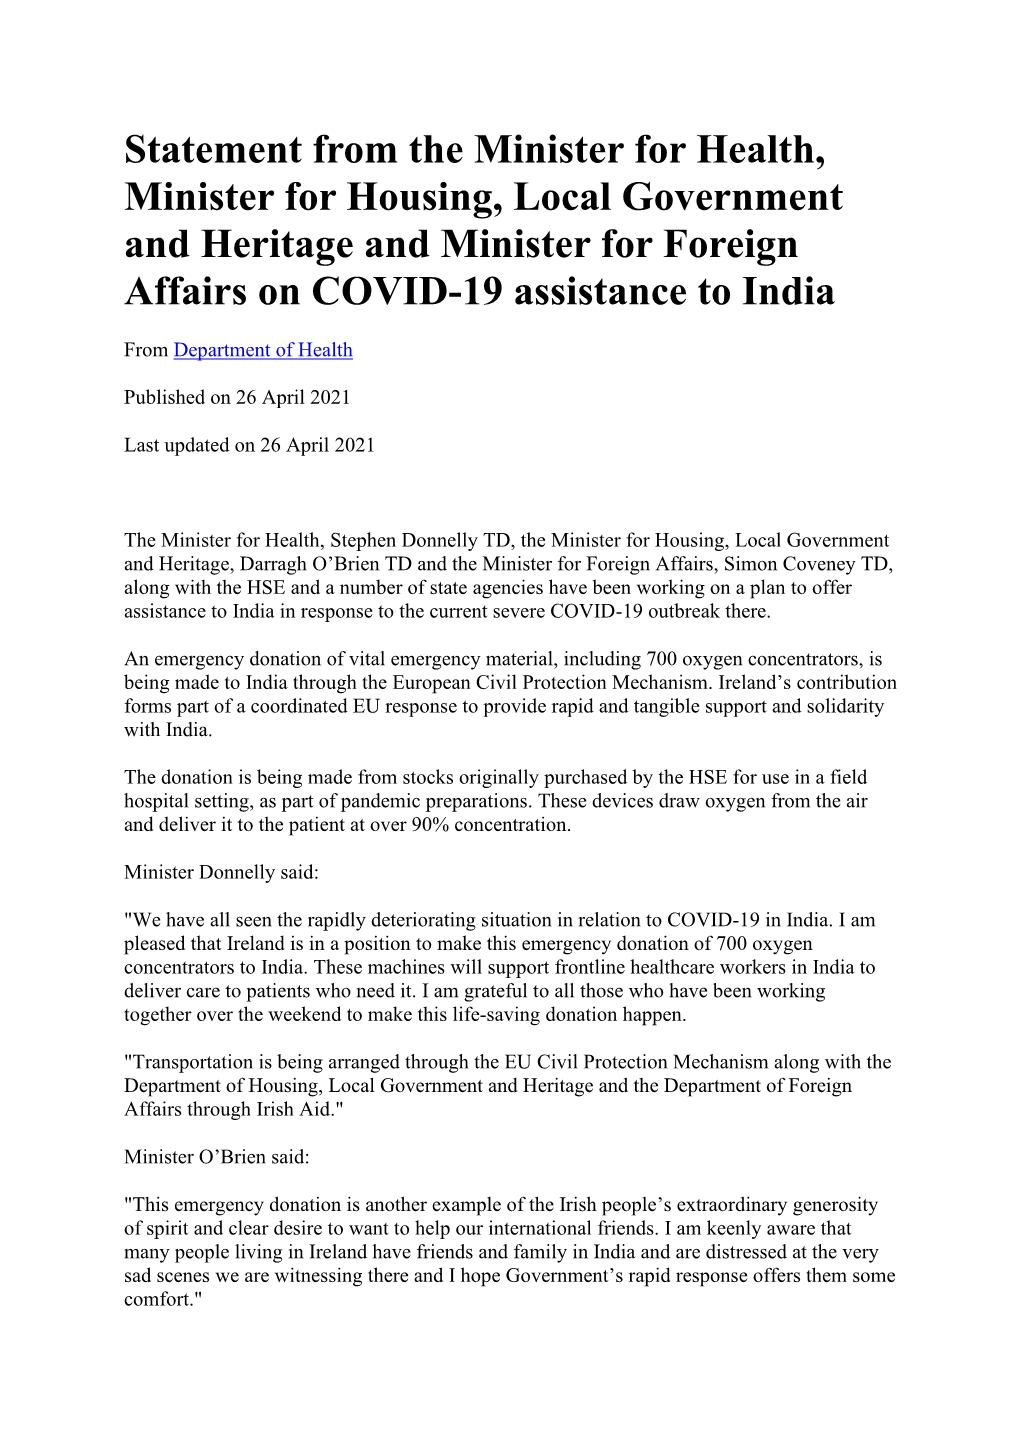 Statement from the Minister for Health, Minister for Housing, Local Government and Heritage and Minister for Foreign Affairs on COVID-19 Assistance to India